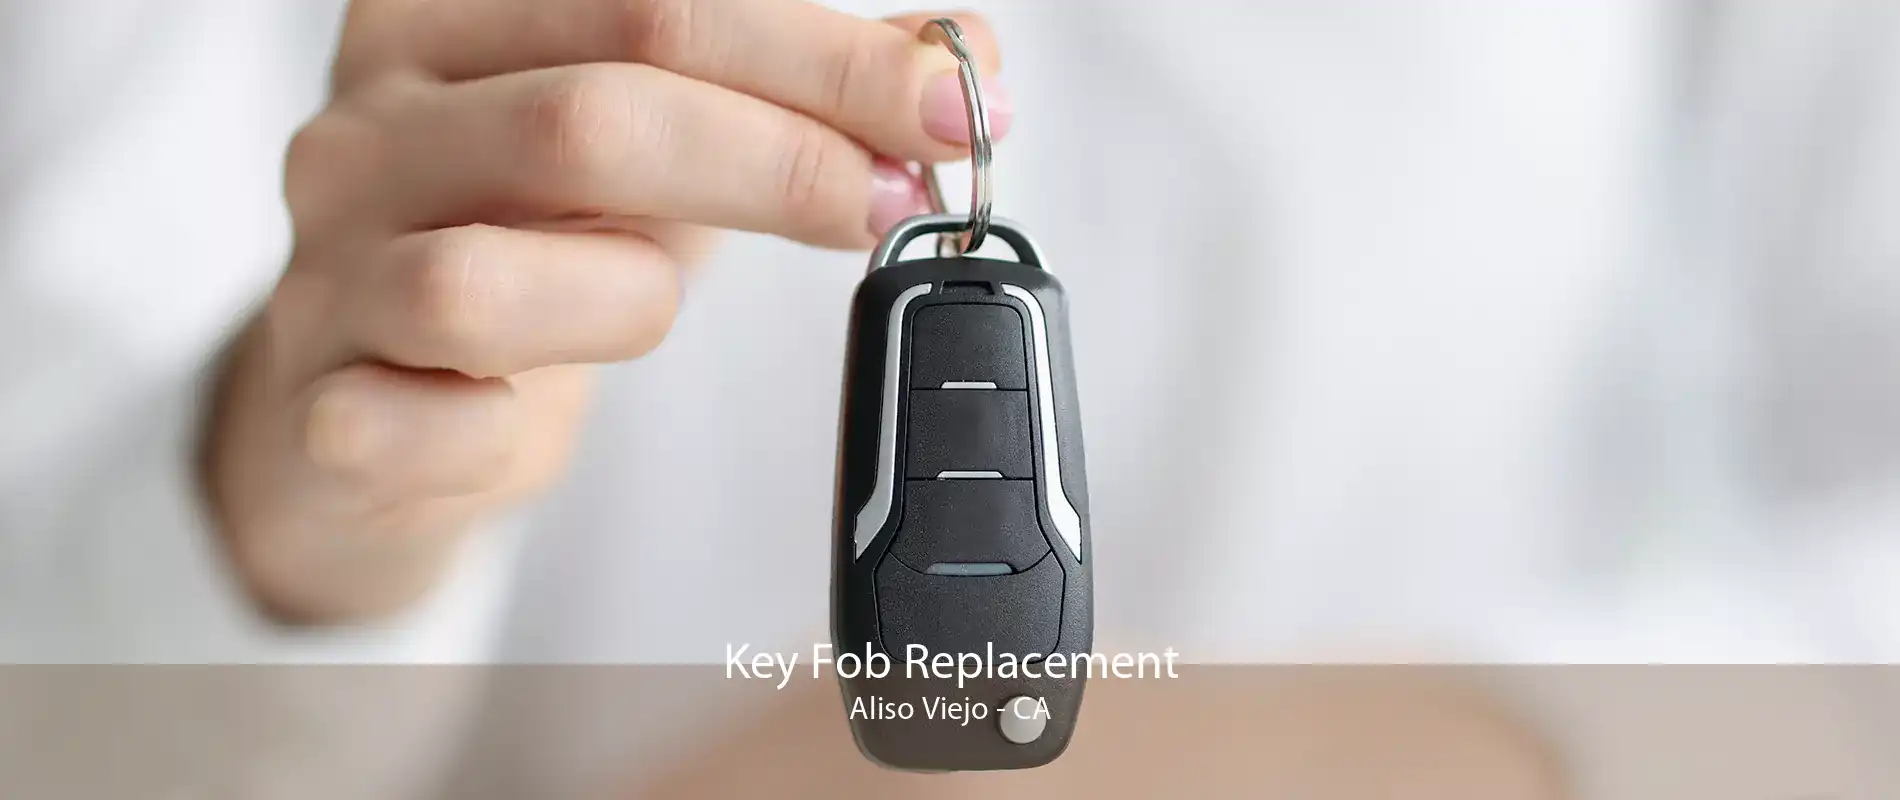 Key Fob Replacement Aliso Viejo - CA